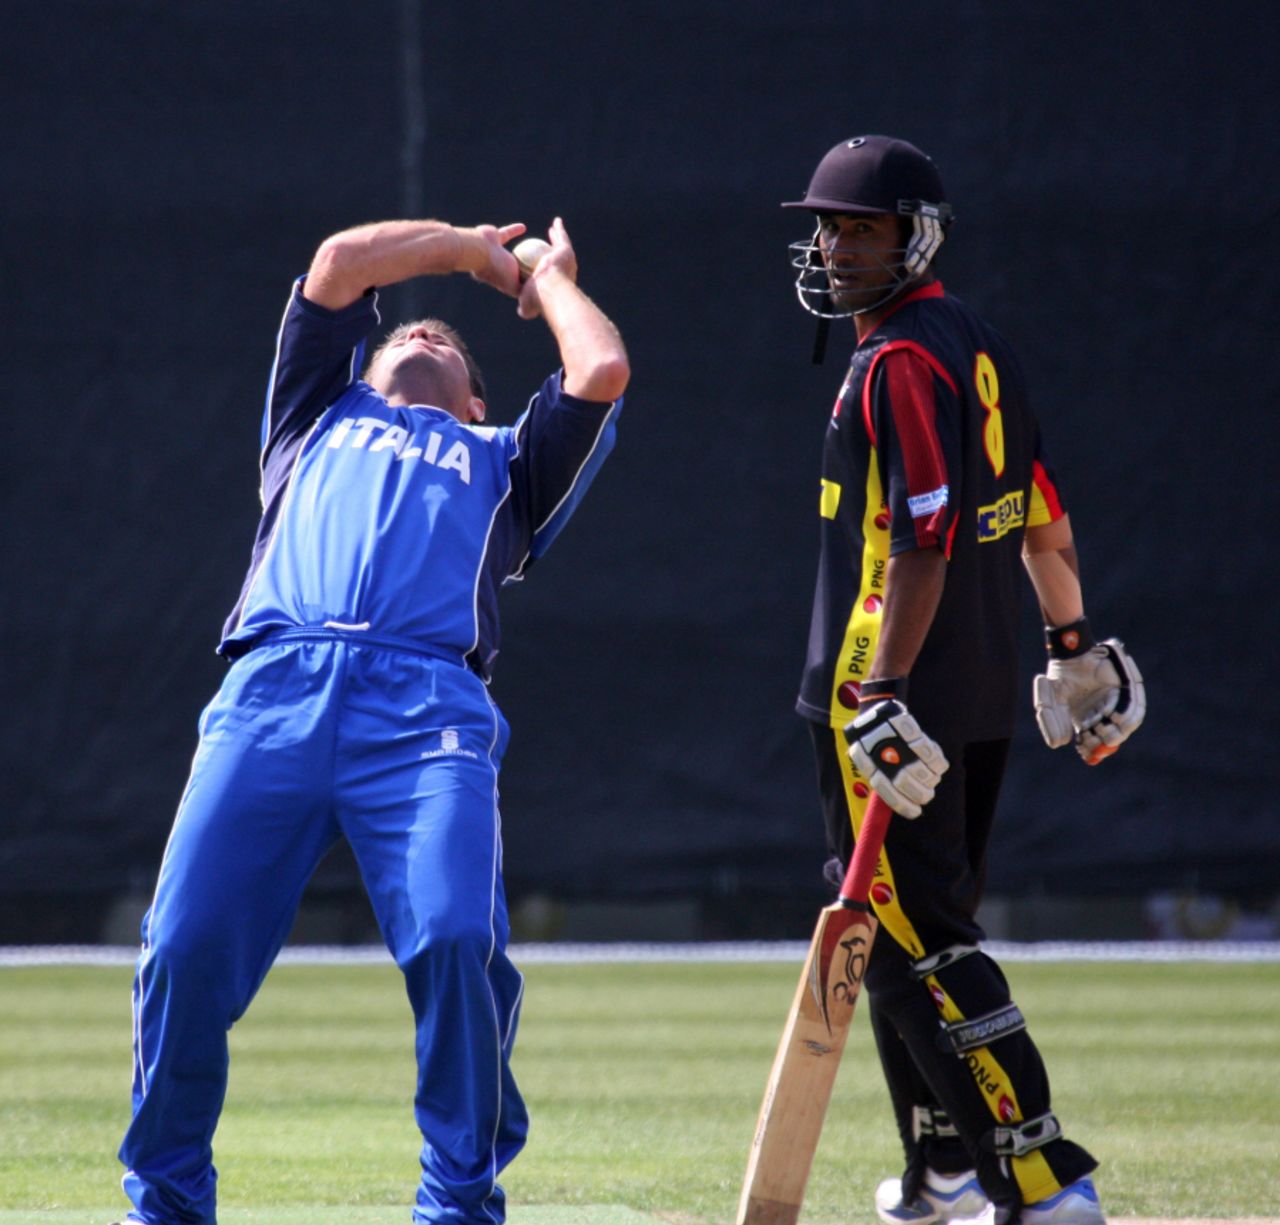 Peter Petricola completes a caught-and-bowled to end Papua New Guinea's innings, Italy v Papua New Guinea, WCL Division 3, Wong Nai, January 23, 2011